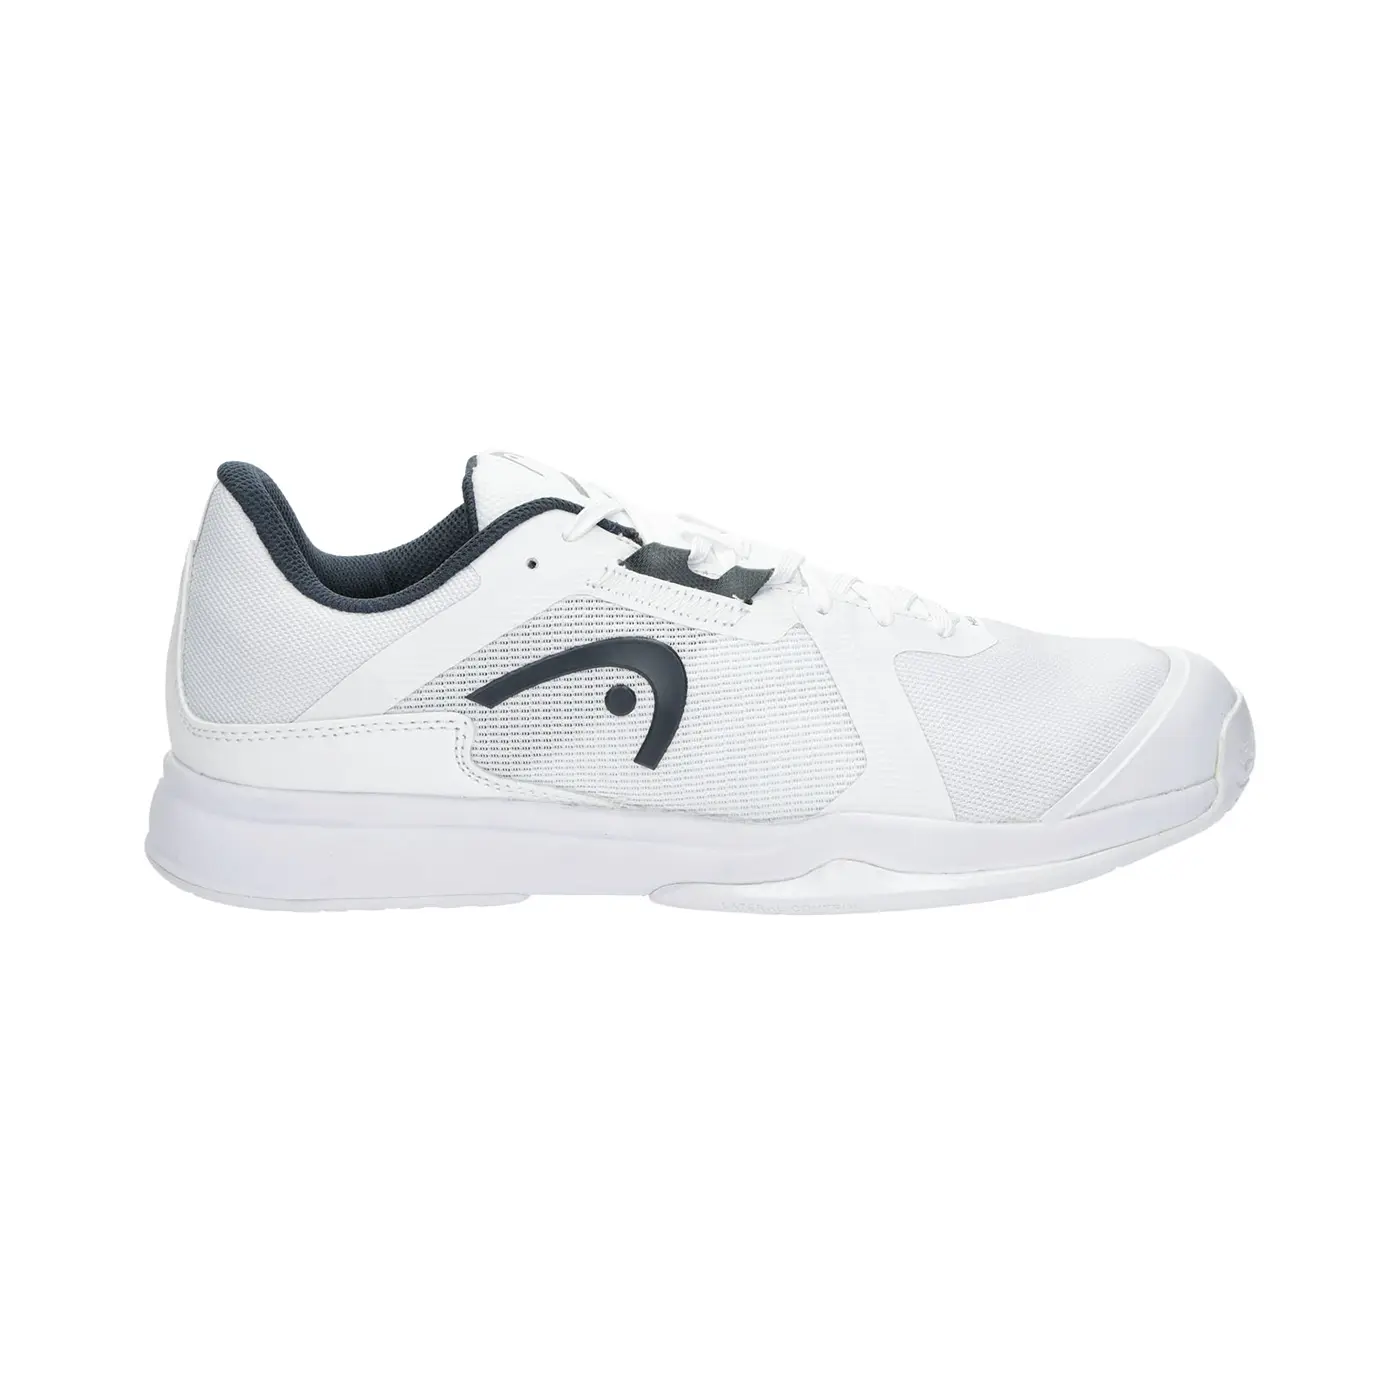 HEAD SPRINT TEAM 3.5 CLAY MEN'S PADEL SHOES WHITE BLUEBERRY Image 1